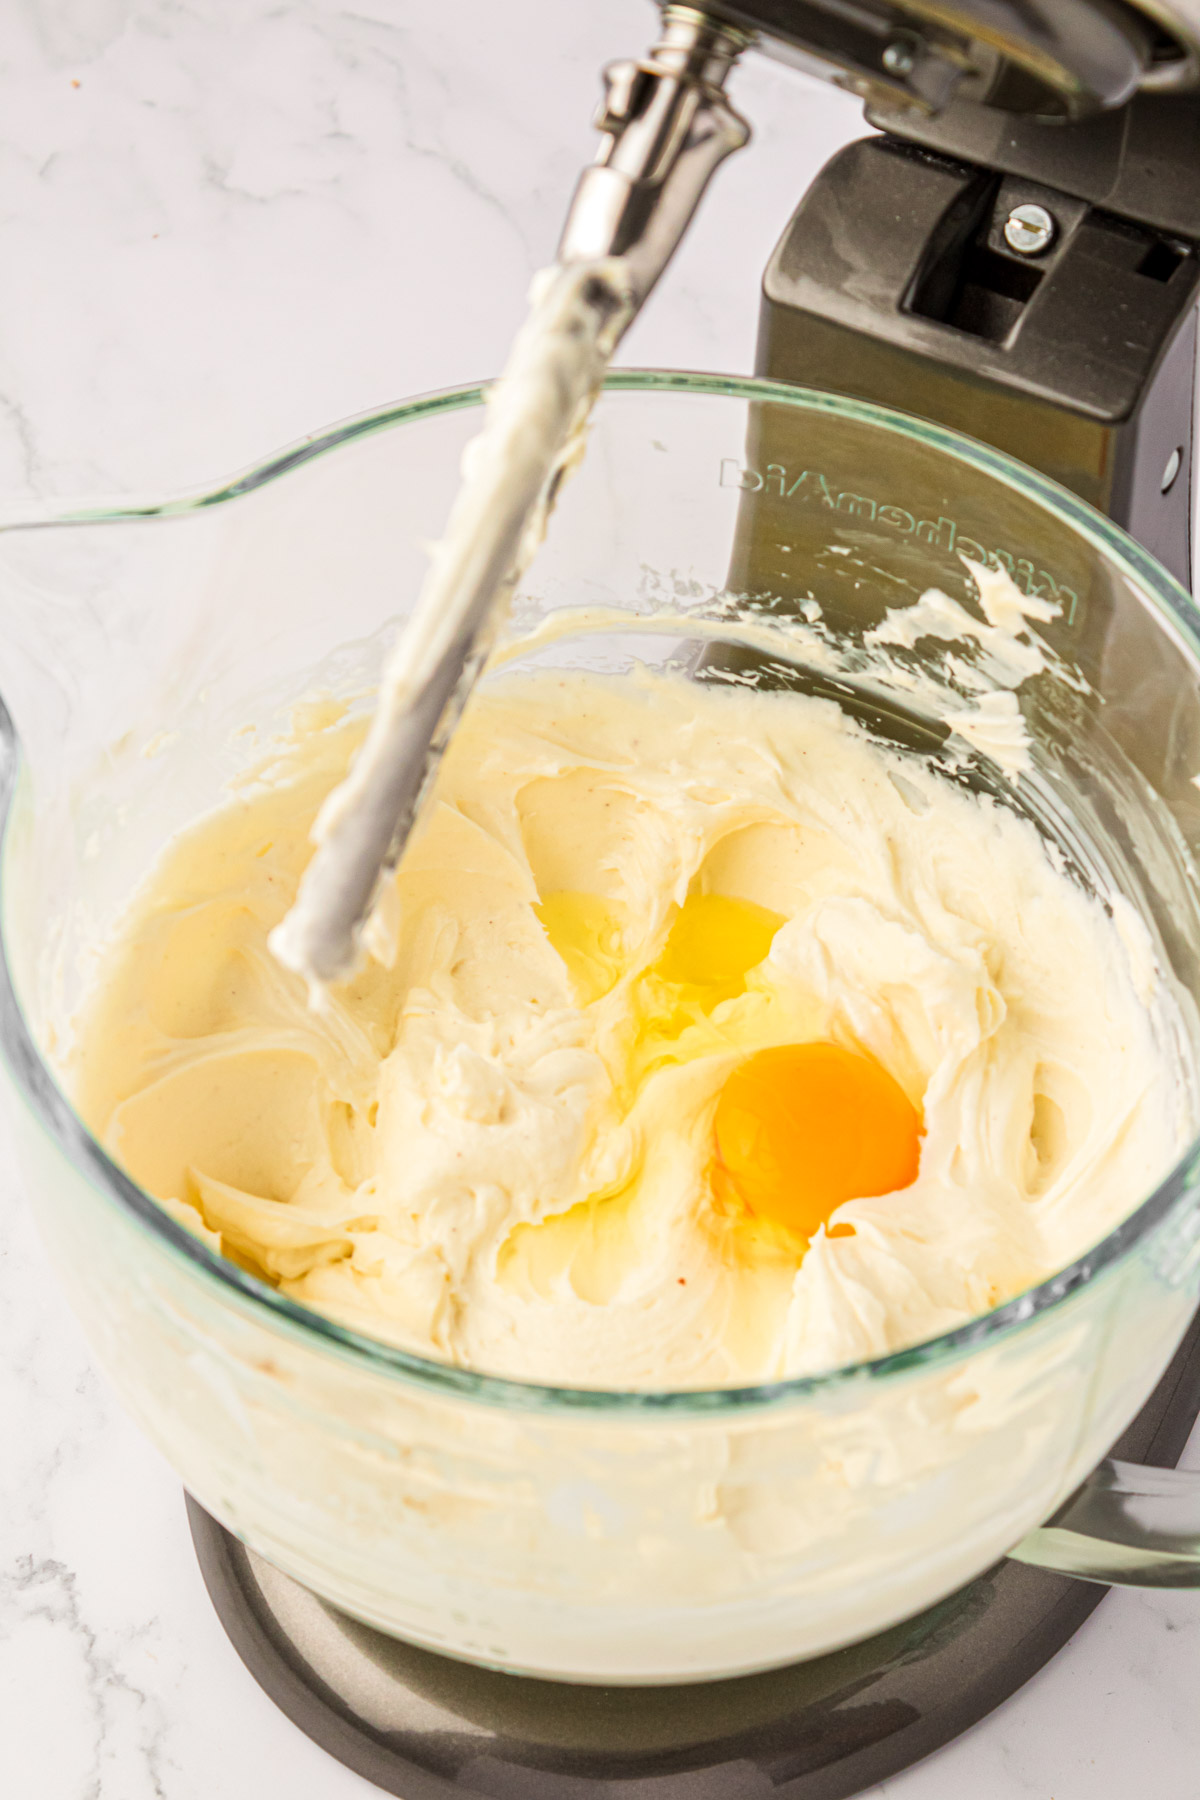 Egg being added to a stand mixer bowl with cheesecake filling.